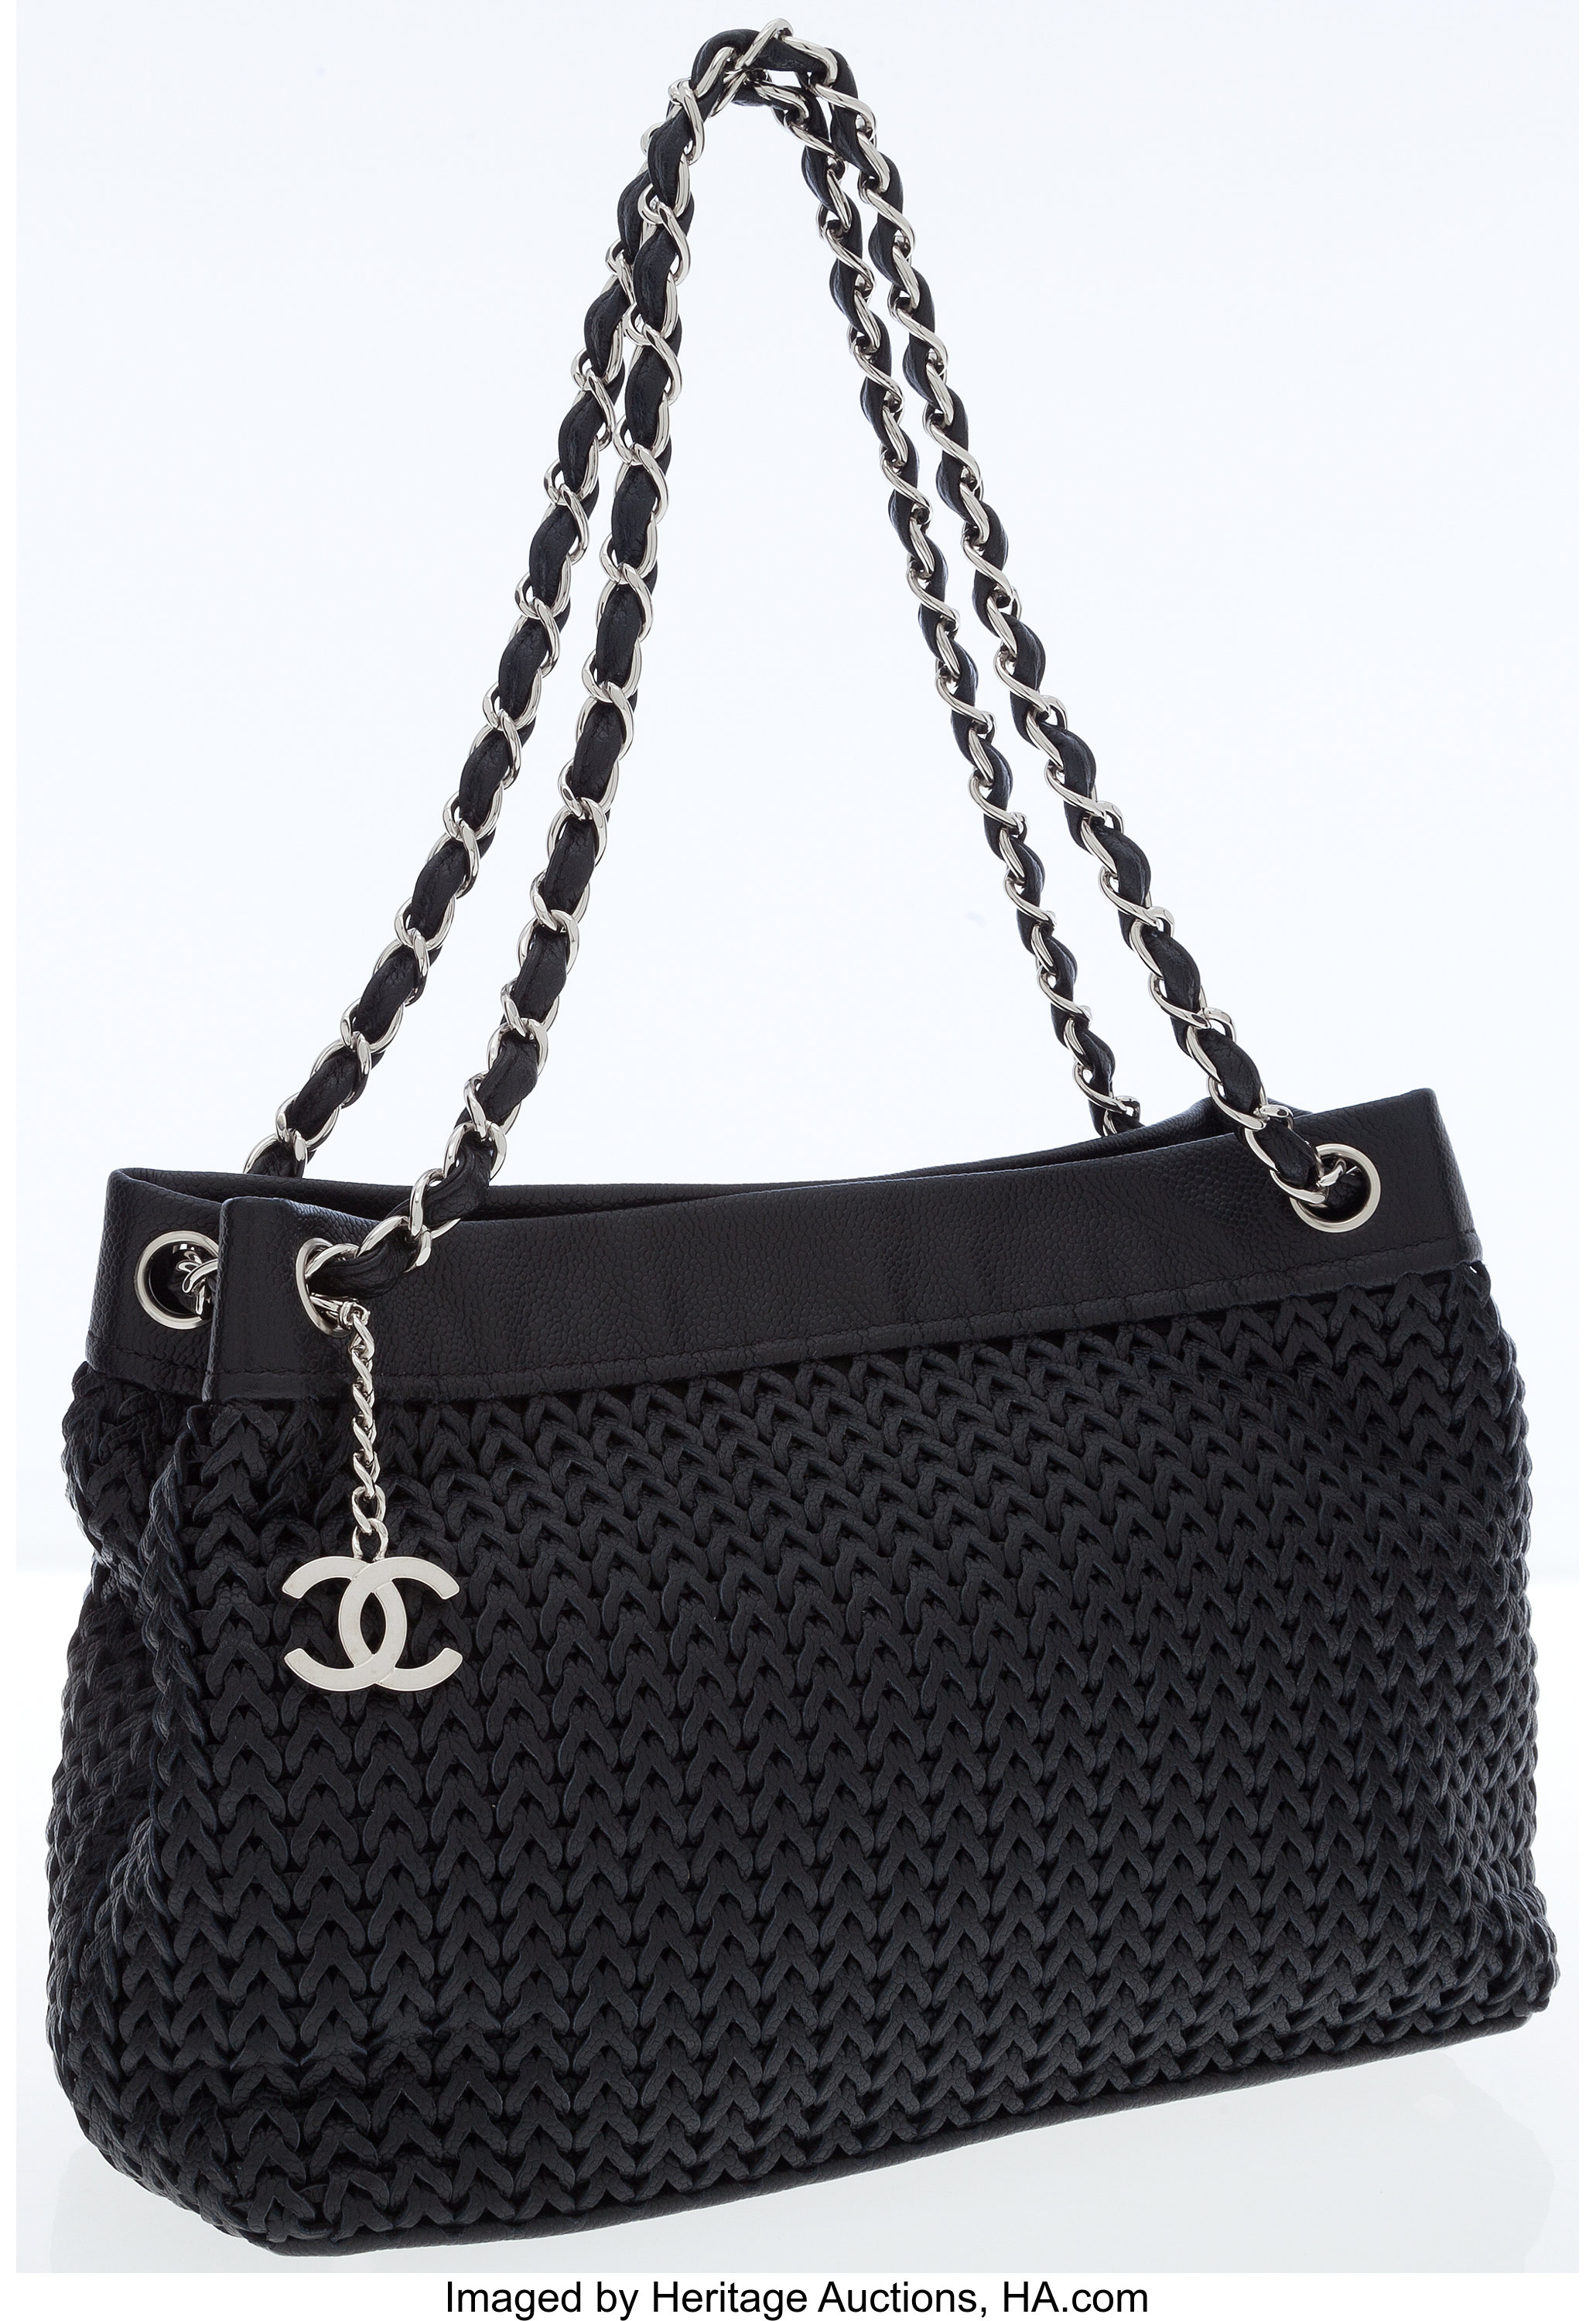 Chanel Black Woven Caviar Leather Tote Bag with Silver Hardware., Lot  #79015